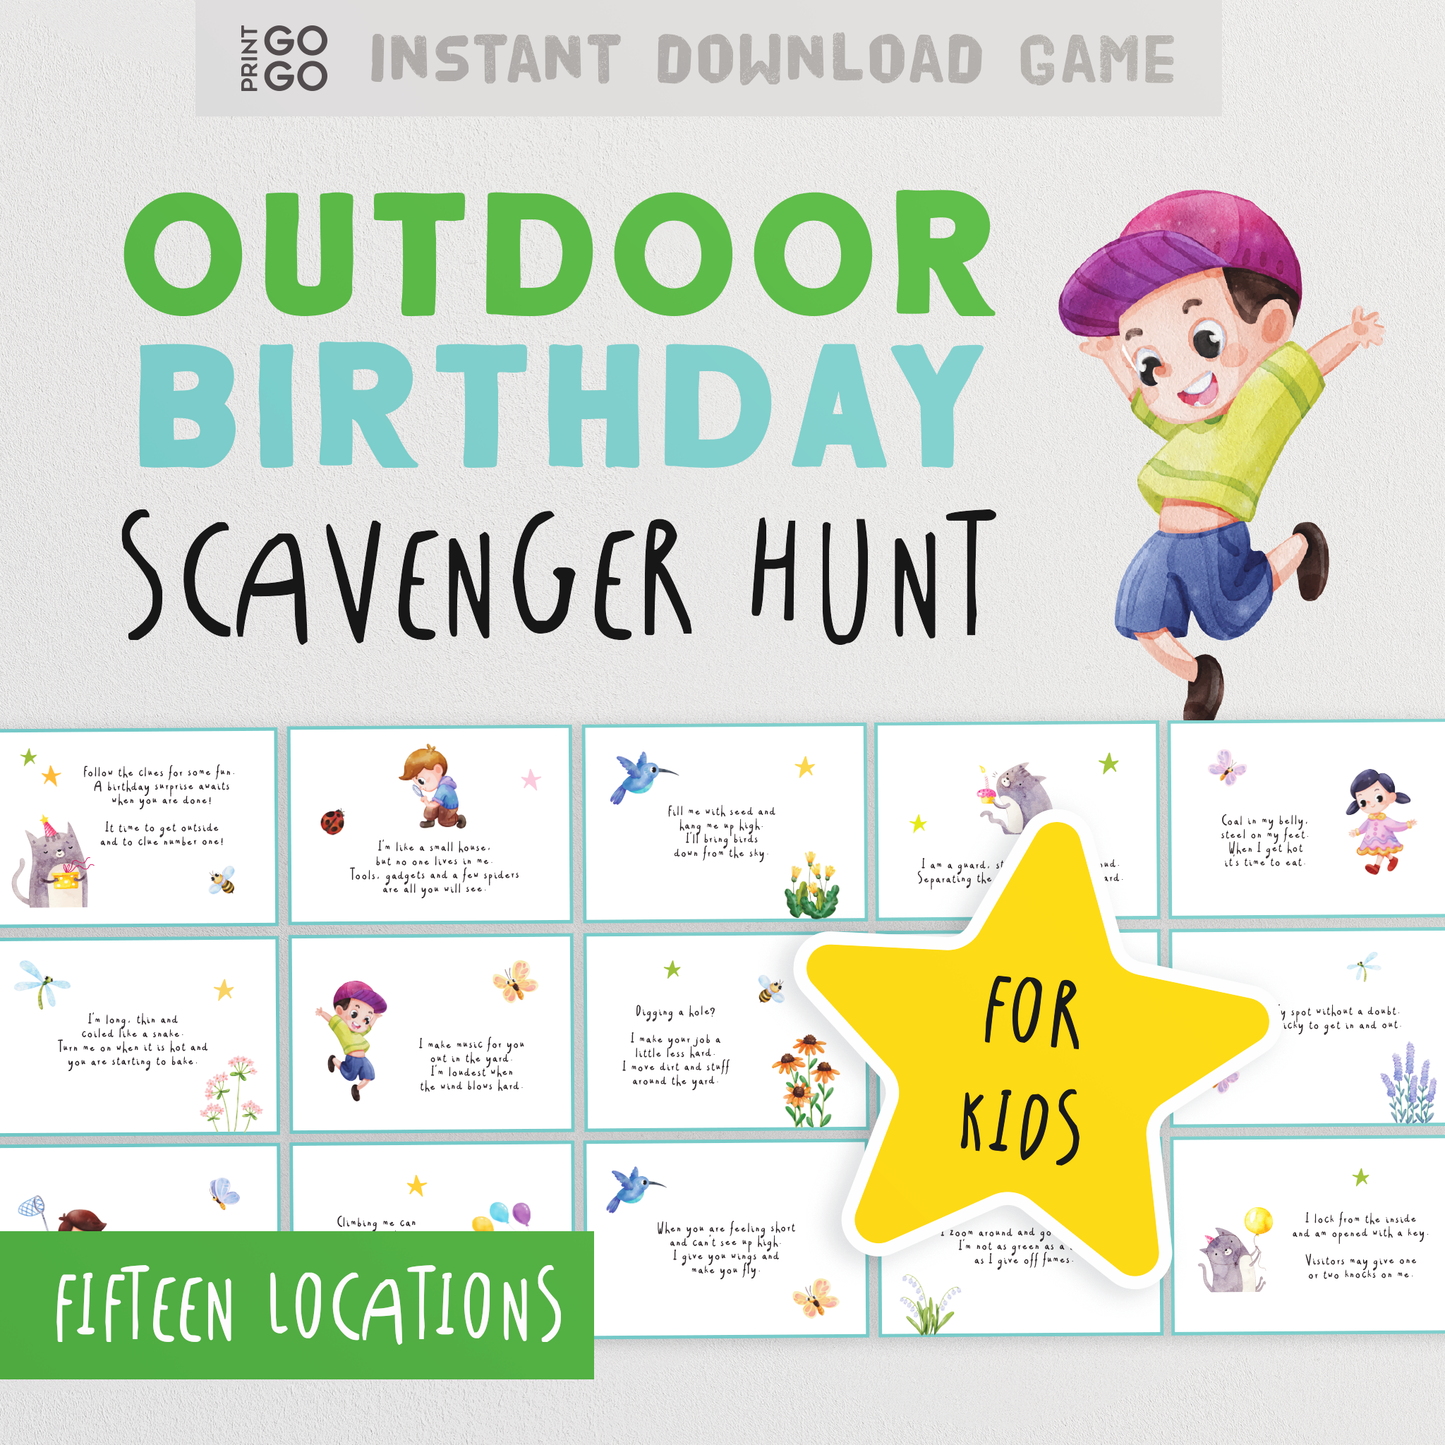 Outdoor Birthday Scavenger Hunt - A Fun Garden Race of Solving Clues and Finding Rewards for Kids